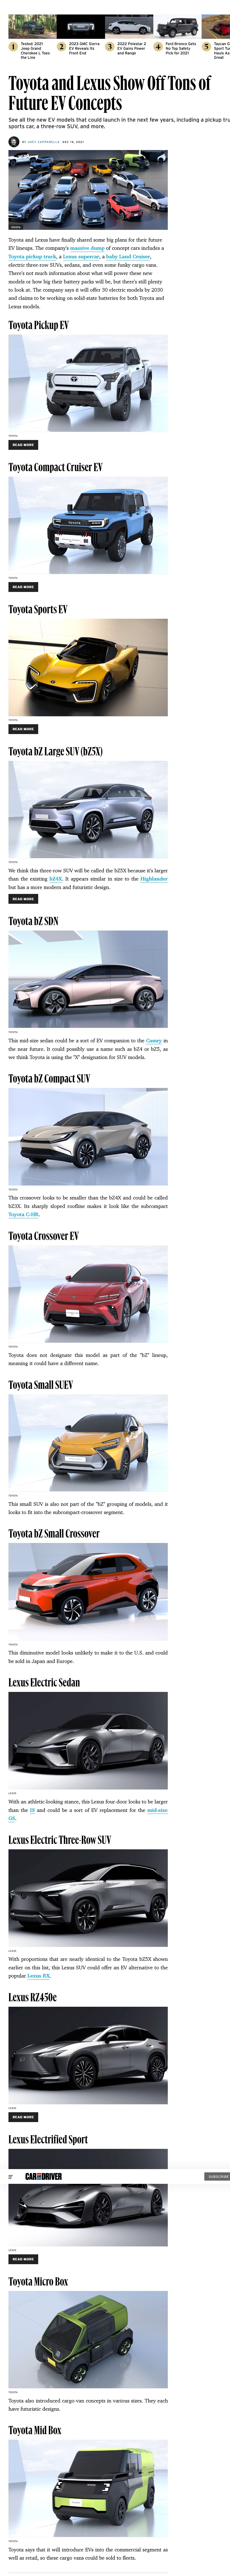 Toyota releases 16 electric vehicles.